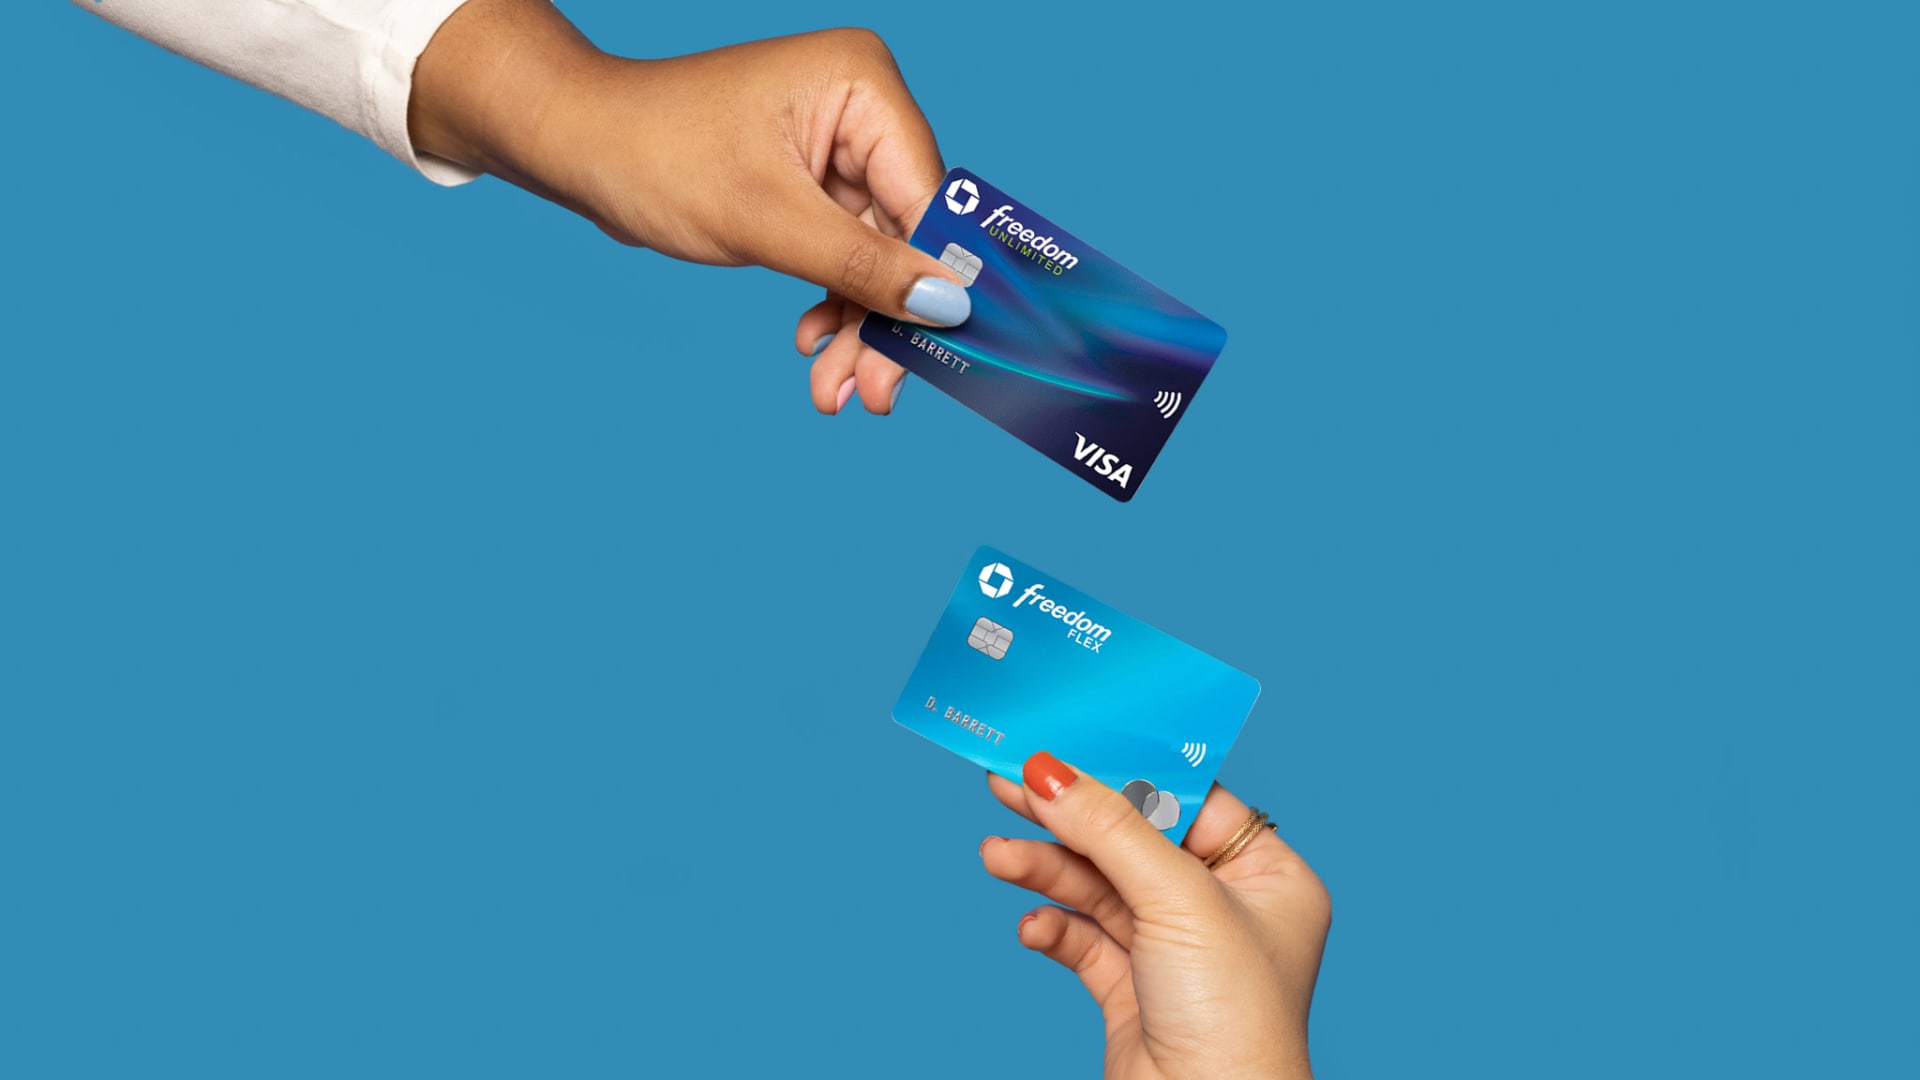 chase-bank-credit-card-know-more